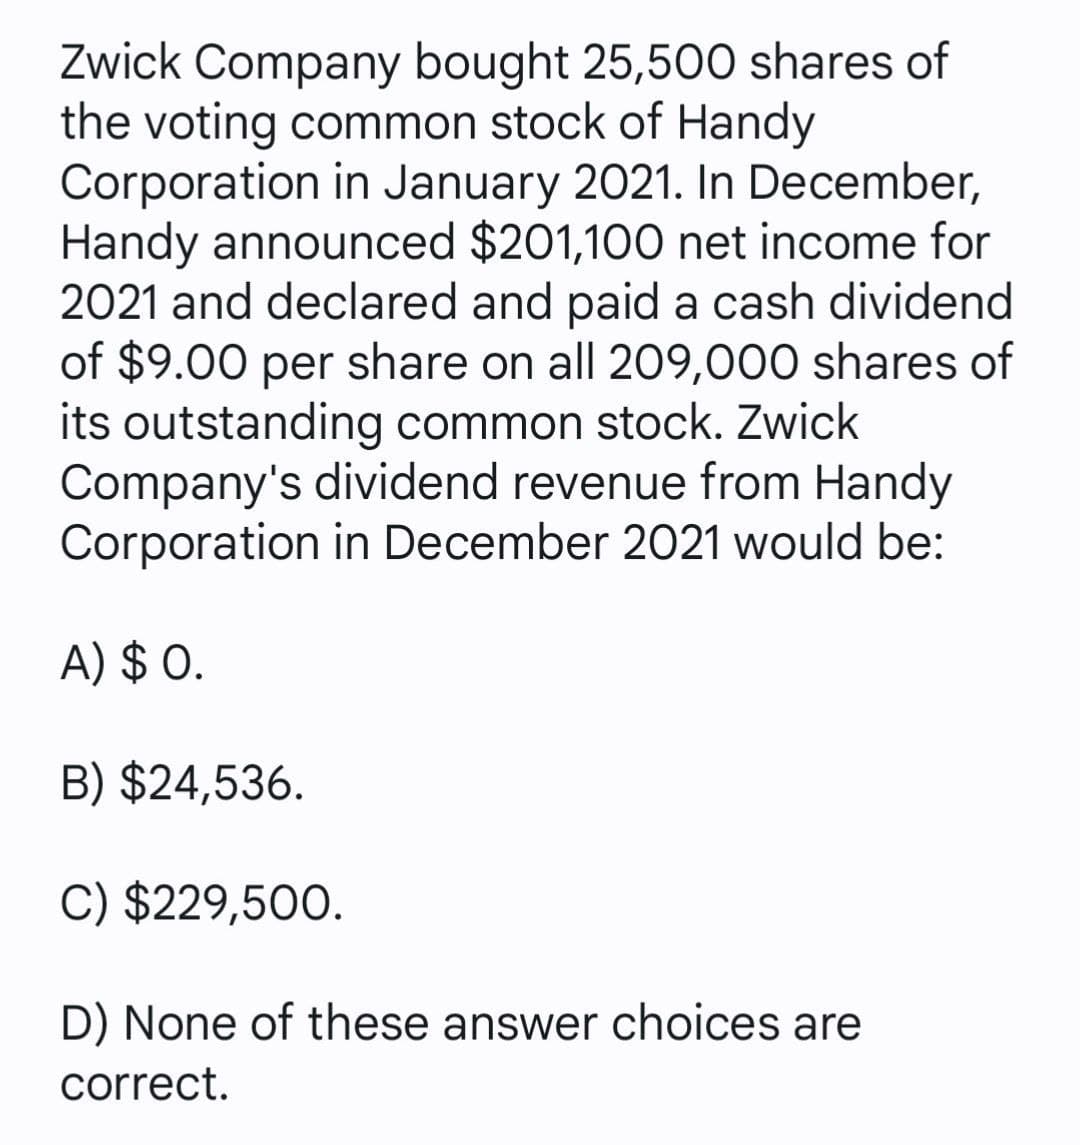 Zwick Company bought 25,500 shares of
the voting common stock of Handy
Corporation in January 2021. In December,
Handy announced $201,100 net income for
2021 and declared and paid a cash dividend
of $9.00 per share on all 209,000 shares of
its outstanding common stock. Zwick
Company's dividend revenue from Handy
Corporation in December 2021 would be:
A) $ 0.
B) $24,536.
C) $229,500.
D) None of these answer choices are
correct.
